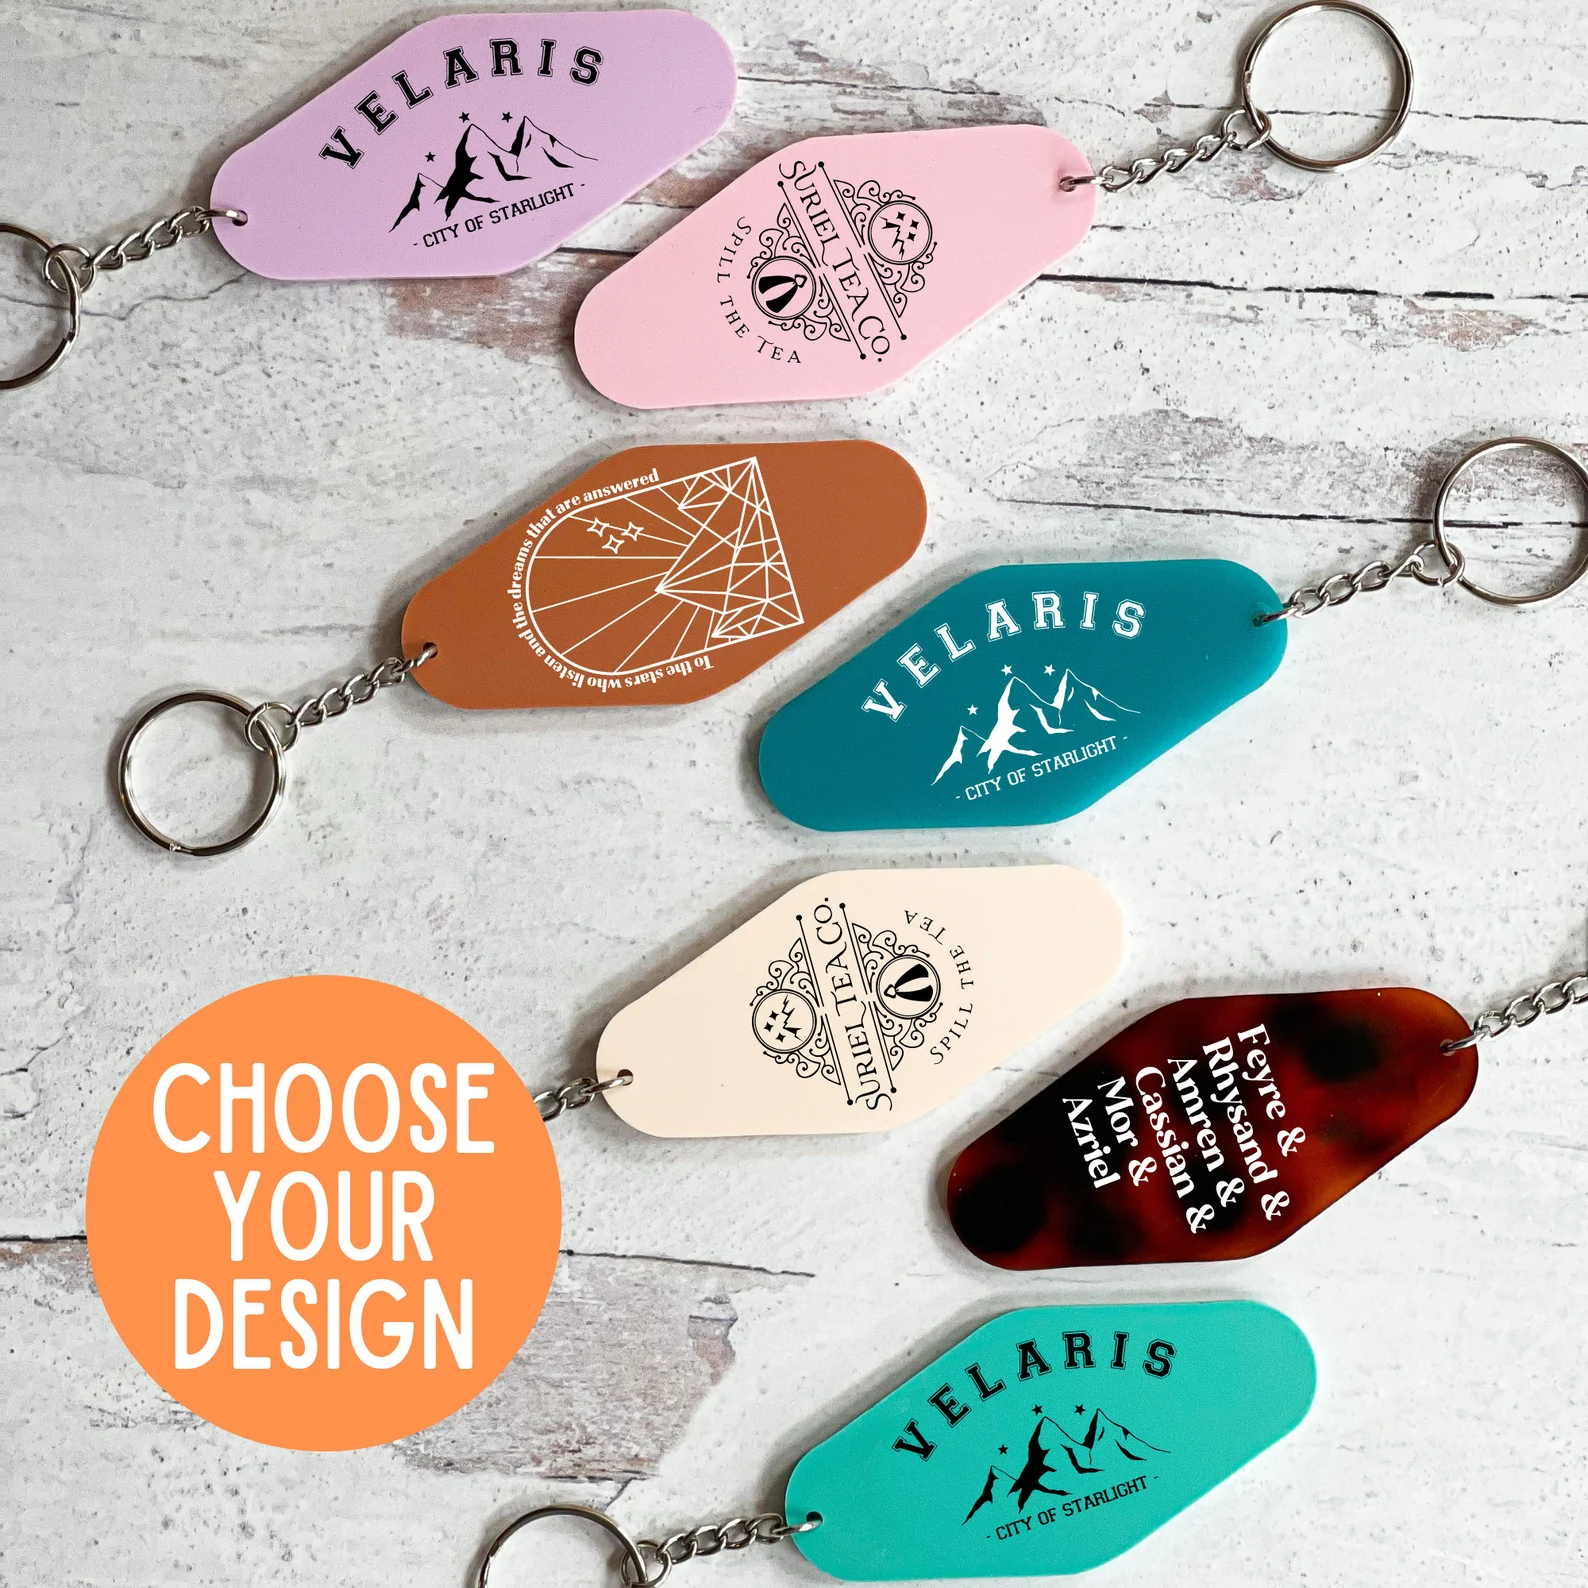 A photo of 7 hotel keychains. Top to bottom, the keychains are lavender with the words Velaris City of Starlight written on it, pink with the words Suriel Tea Co Spill the tea written on it, orange with the words to the stars who listen and the dreams that are answered written on it, blue with the words Velaris City of Starlight written on it, cream Suriel Tea Co Spill the tea written on it, red with character names written on it, and teal with the words Velaris City of Starlight written on it.